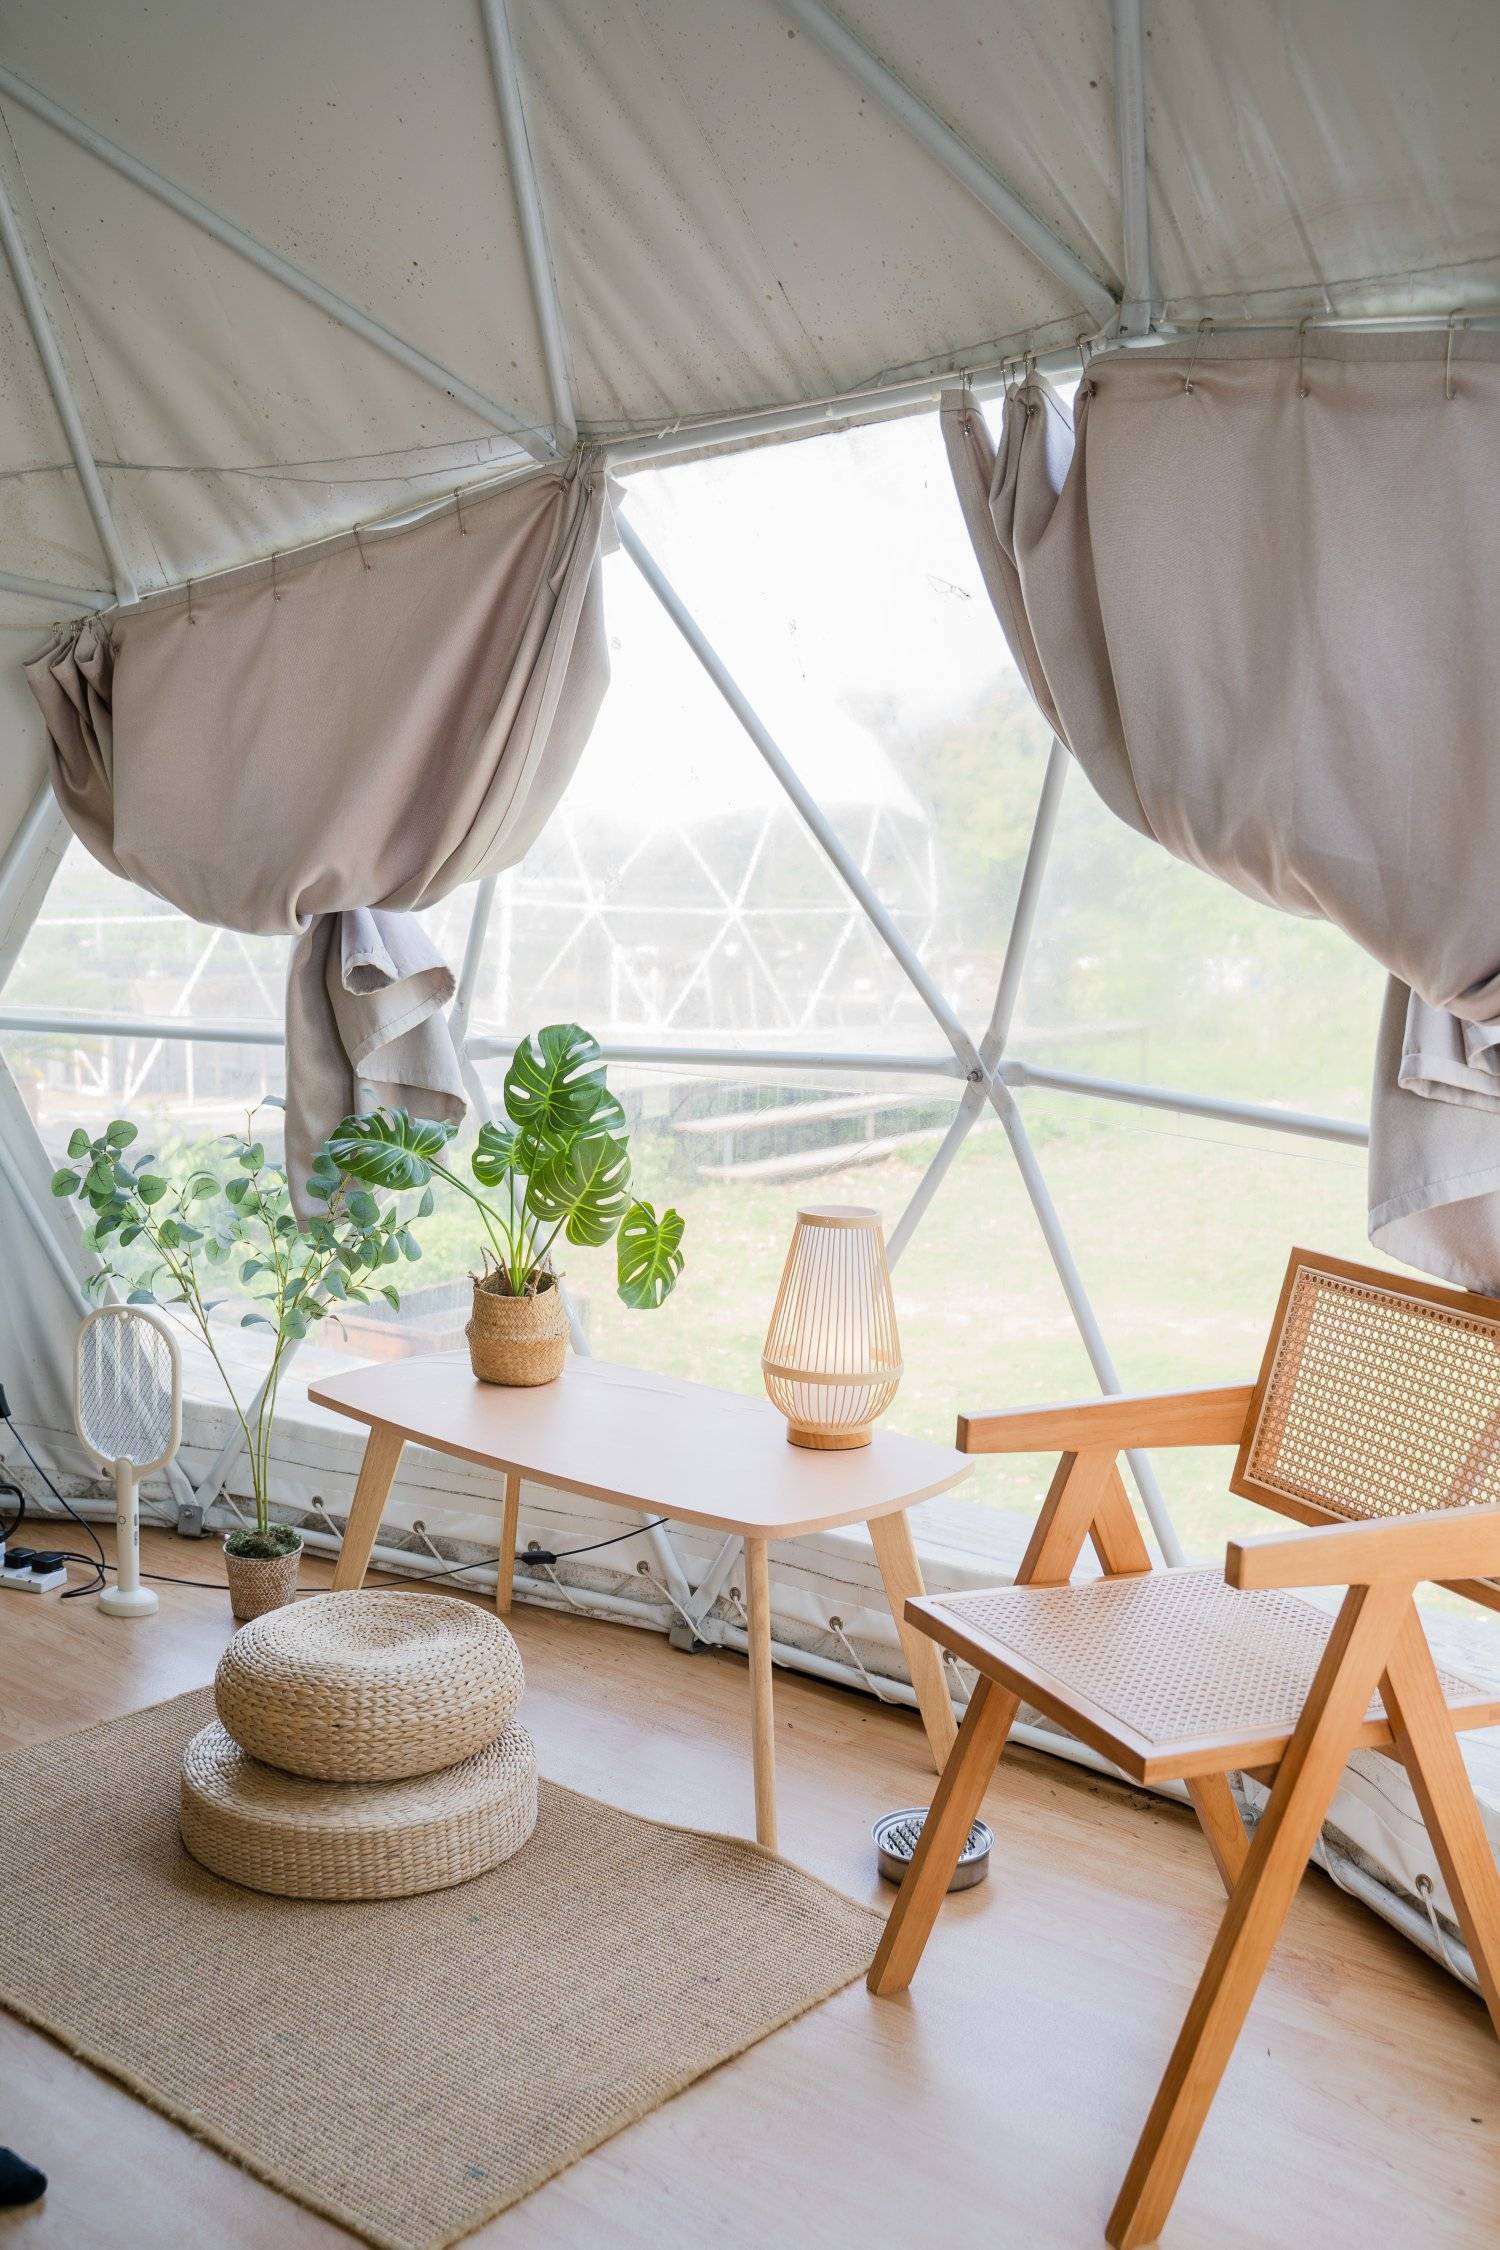 Nomad Terrace - Dome & Bell Tent & Glamping Tent 【Private Platform】 5M Dome Tent with DIY Buffet Breakfast (4 pax) - Zone D terraced area｜Nomad Terrance 9